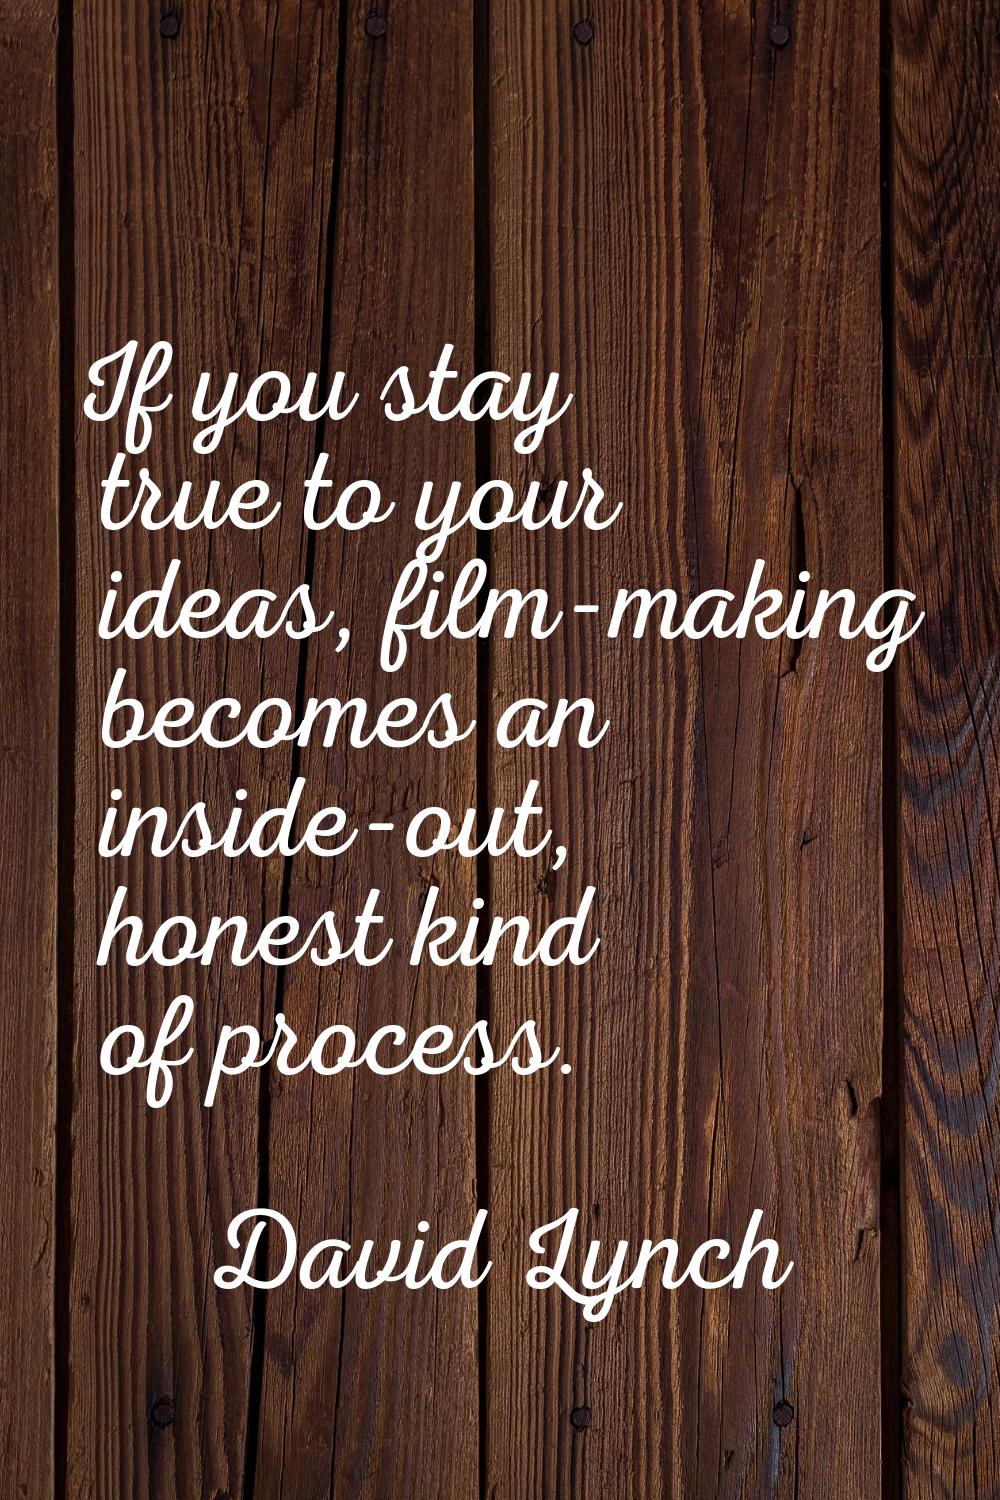 If you stay true to your ideas, film-making becomes an inside-out, honest kind of process.